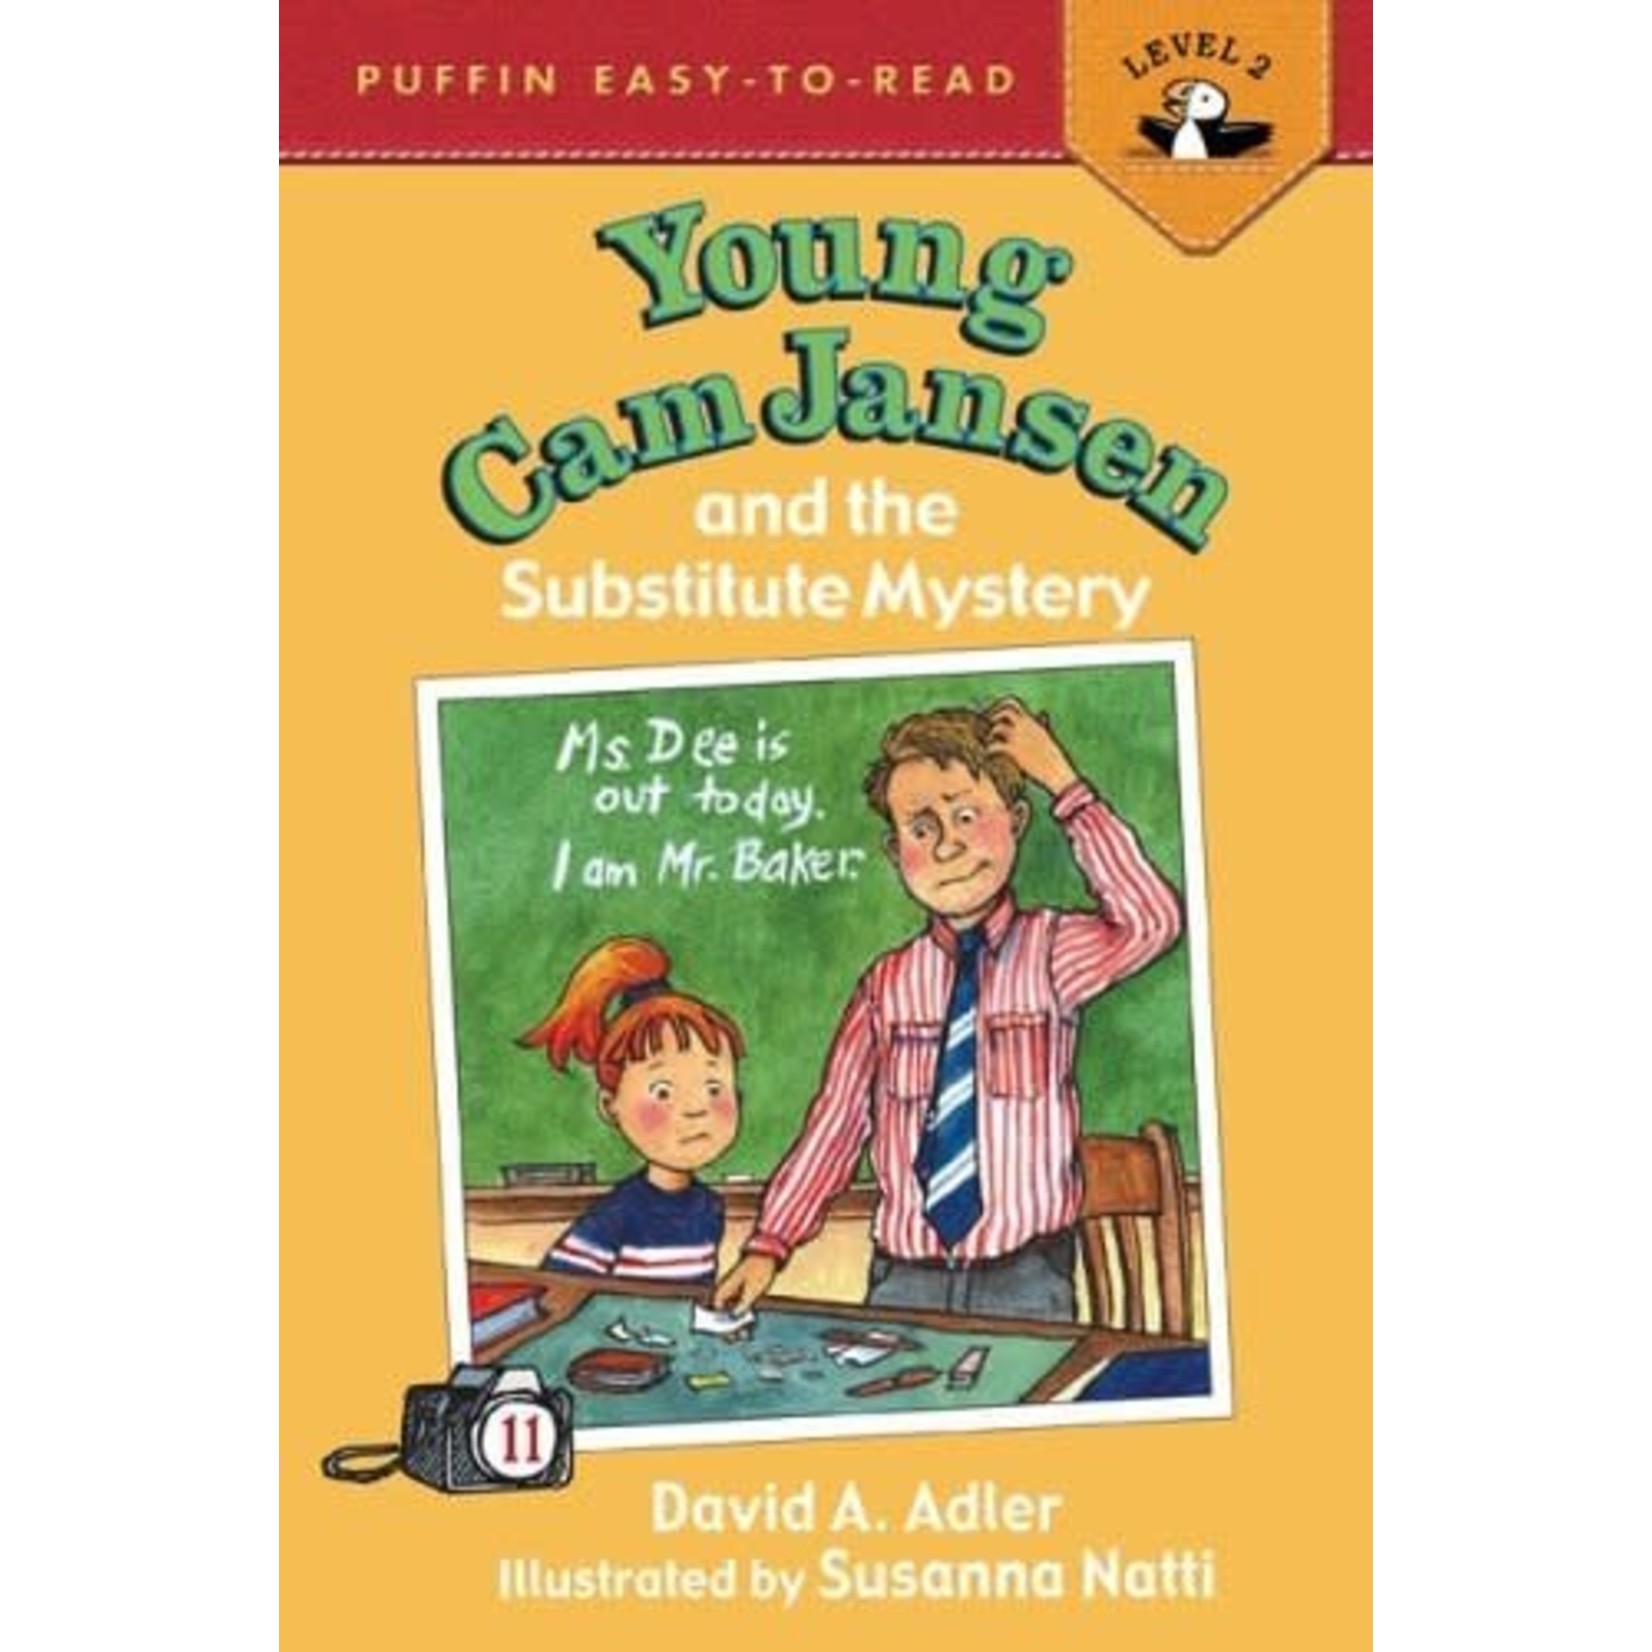 David A Adler Young Cam Jansen and the Substitute Mystery - Puffin Easy to Read 2